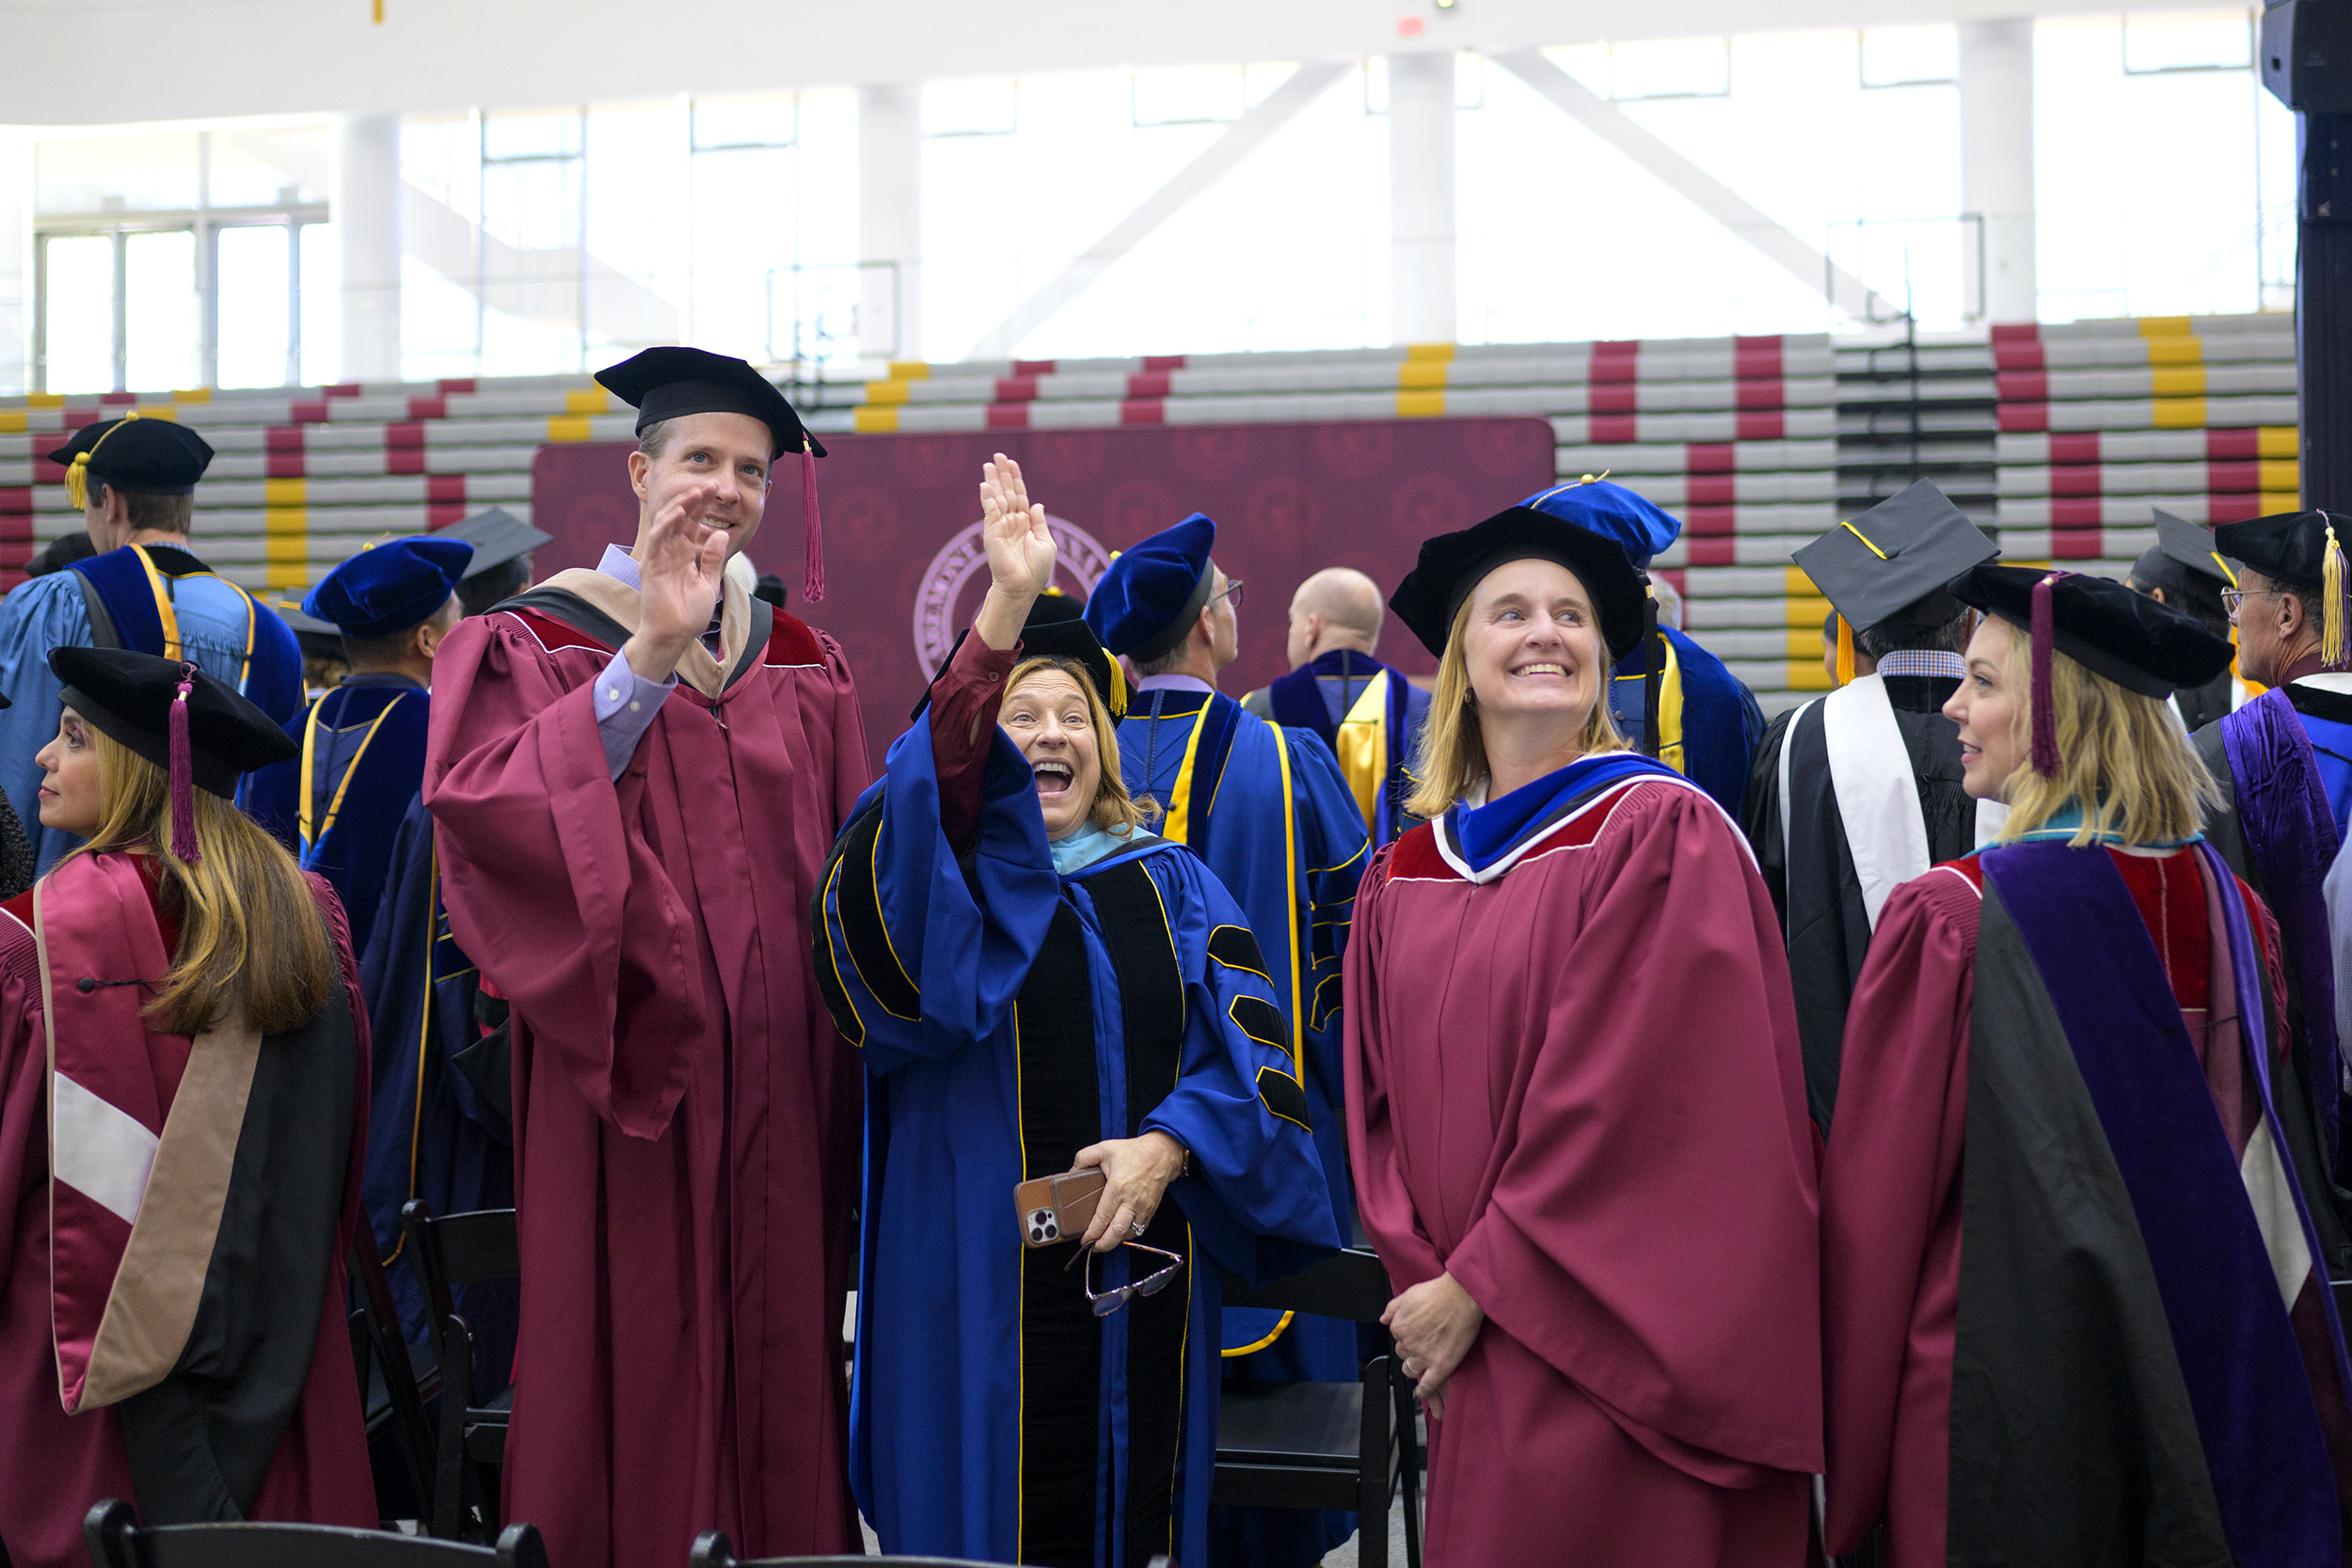 Sharon Basso and Diana "DT" Graves waving during Convocation 2023.